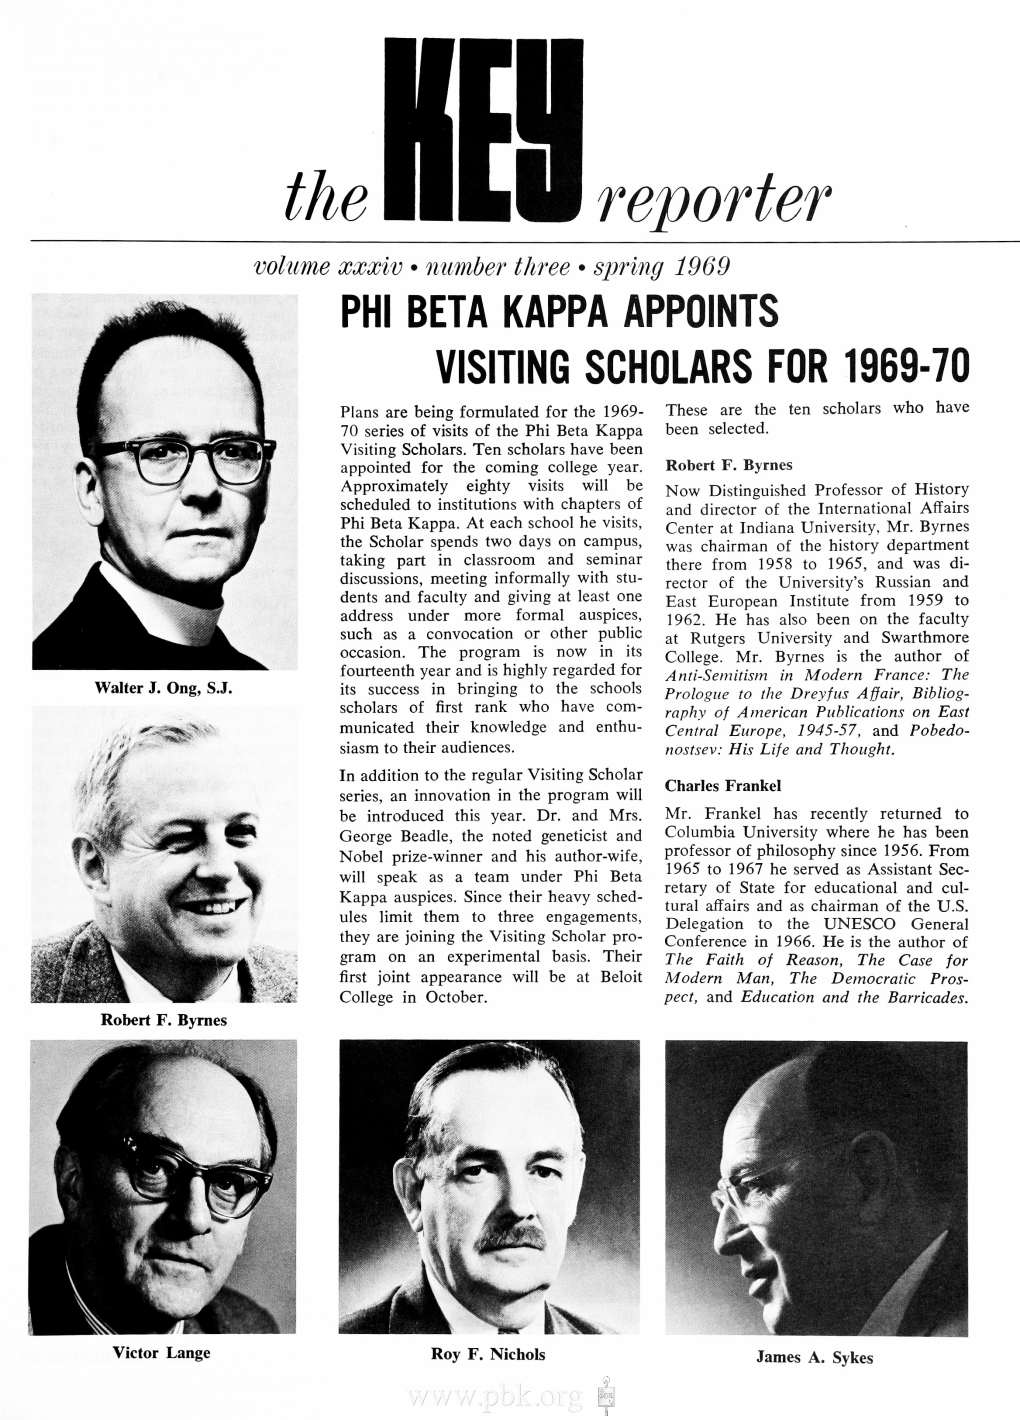 Visiting Scholars for 1969-70